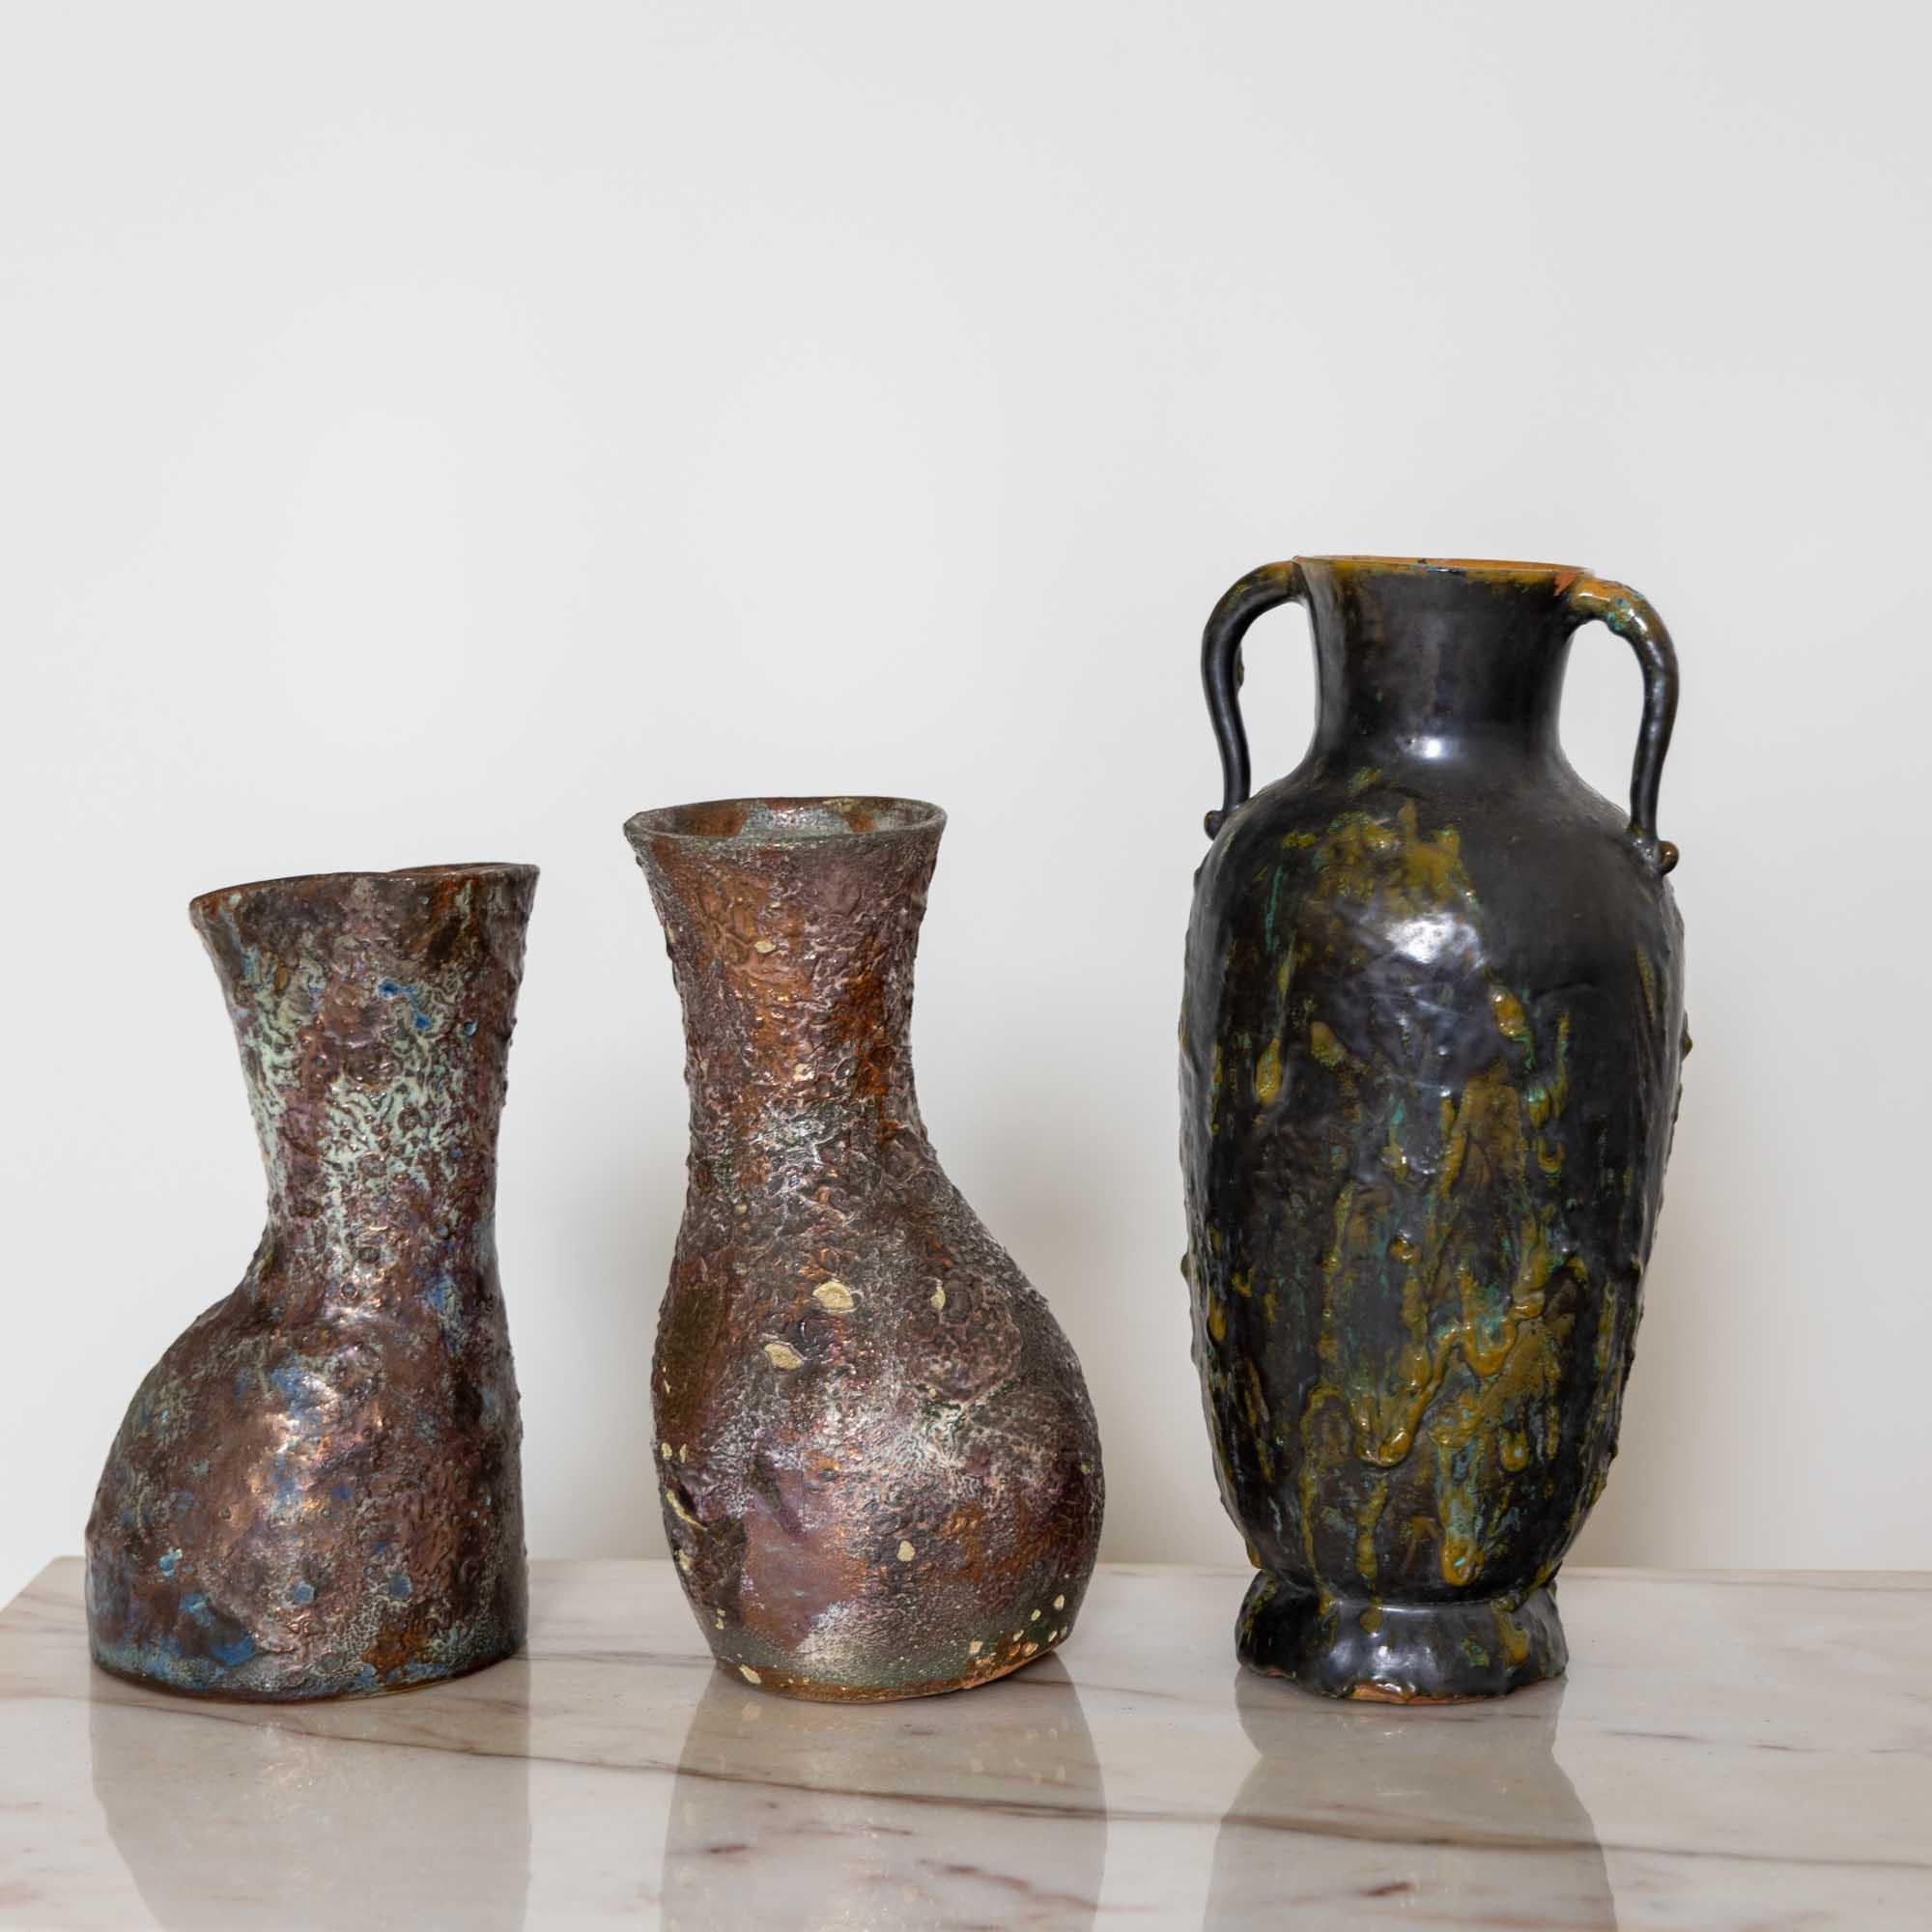 Four unique ceramic vases with rough surfaces in dark dramatic colours by Nereo Boaretto (1914-1977). 

Signed Nereo Boaretto on the bottom and partially dated.